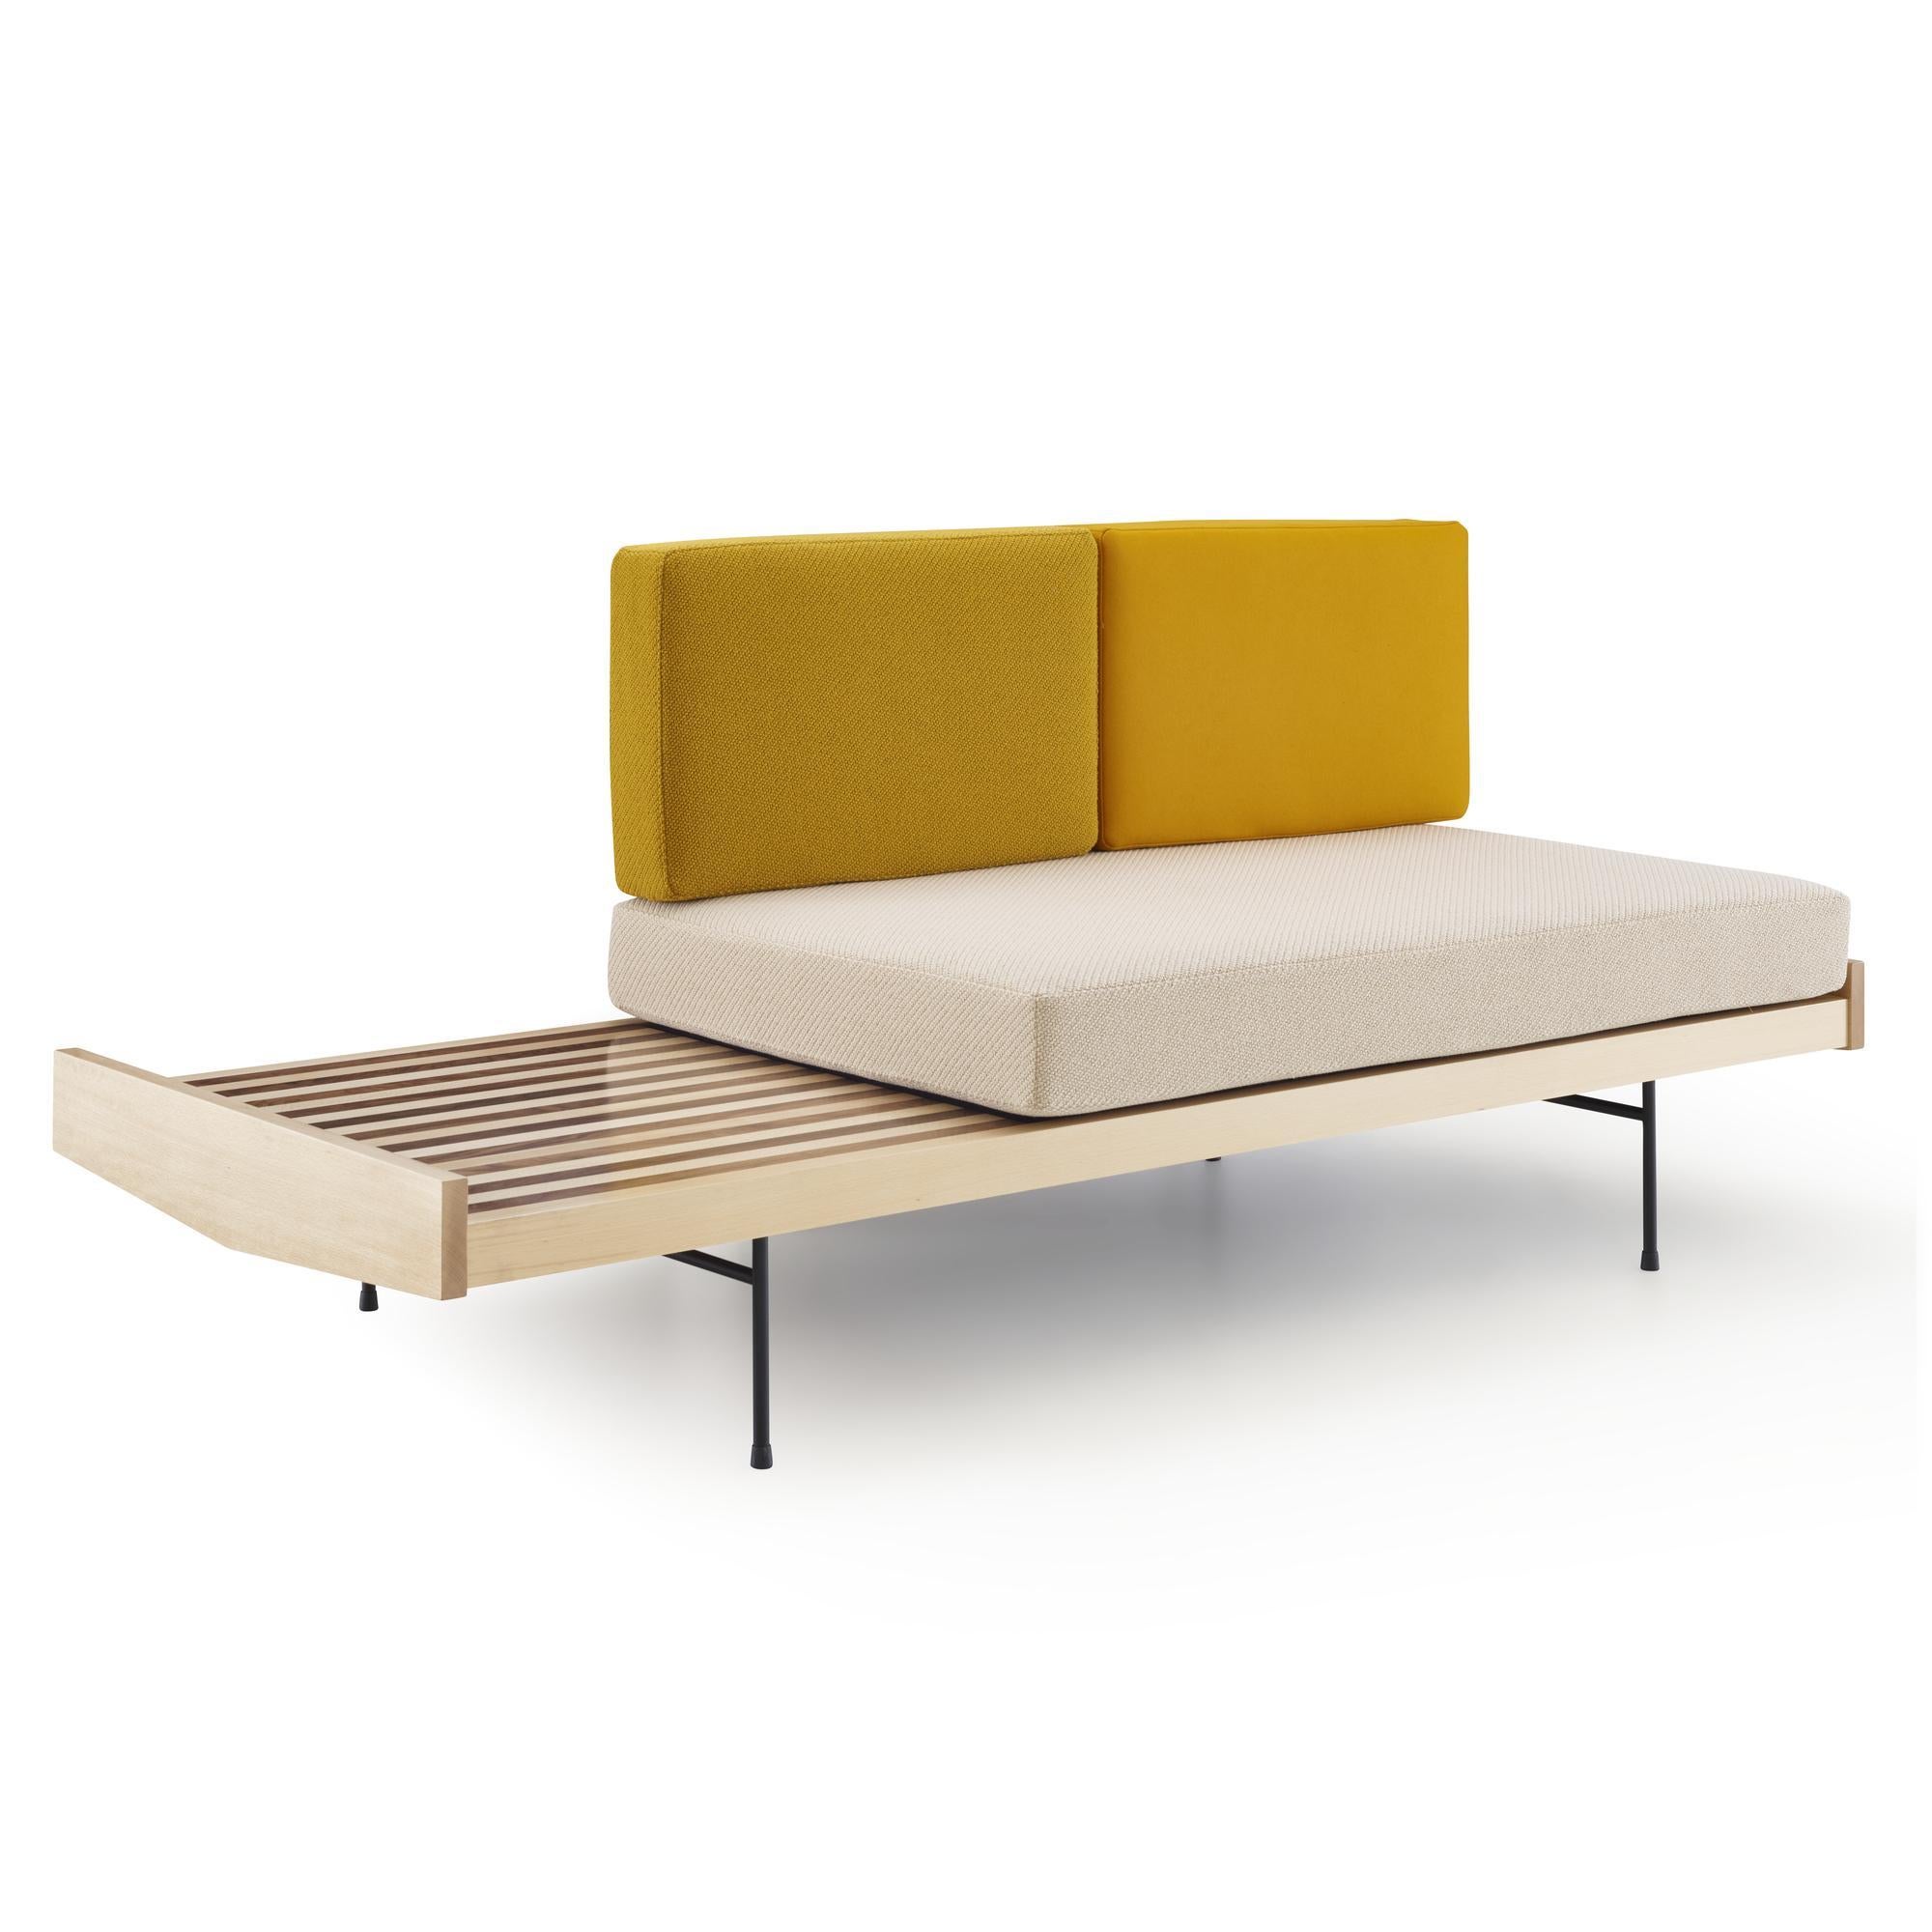 A revolutionary piece on the French market of the early Fifties, the minimalist elegance of the Daybed banquette has every chance of achieving even greater success today, given that views on such economy of form have been developed over decades. A